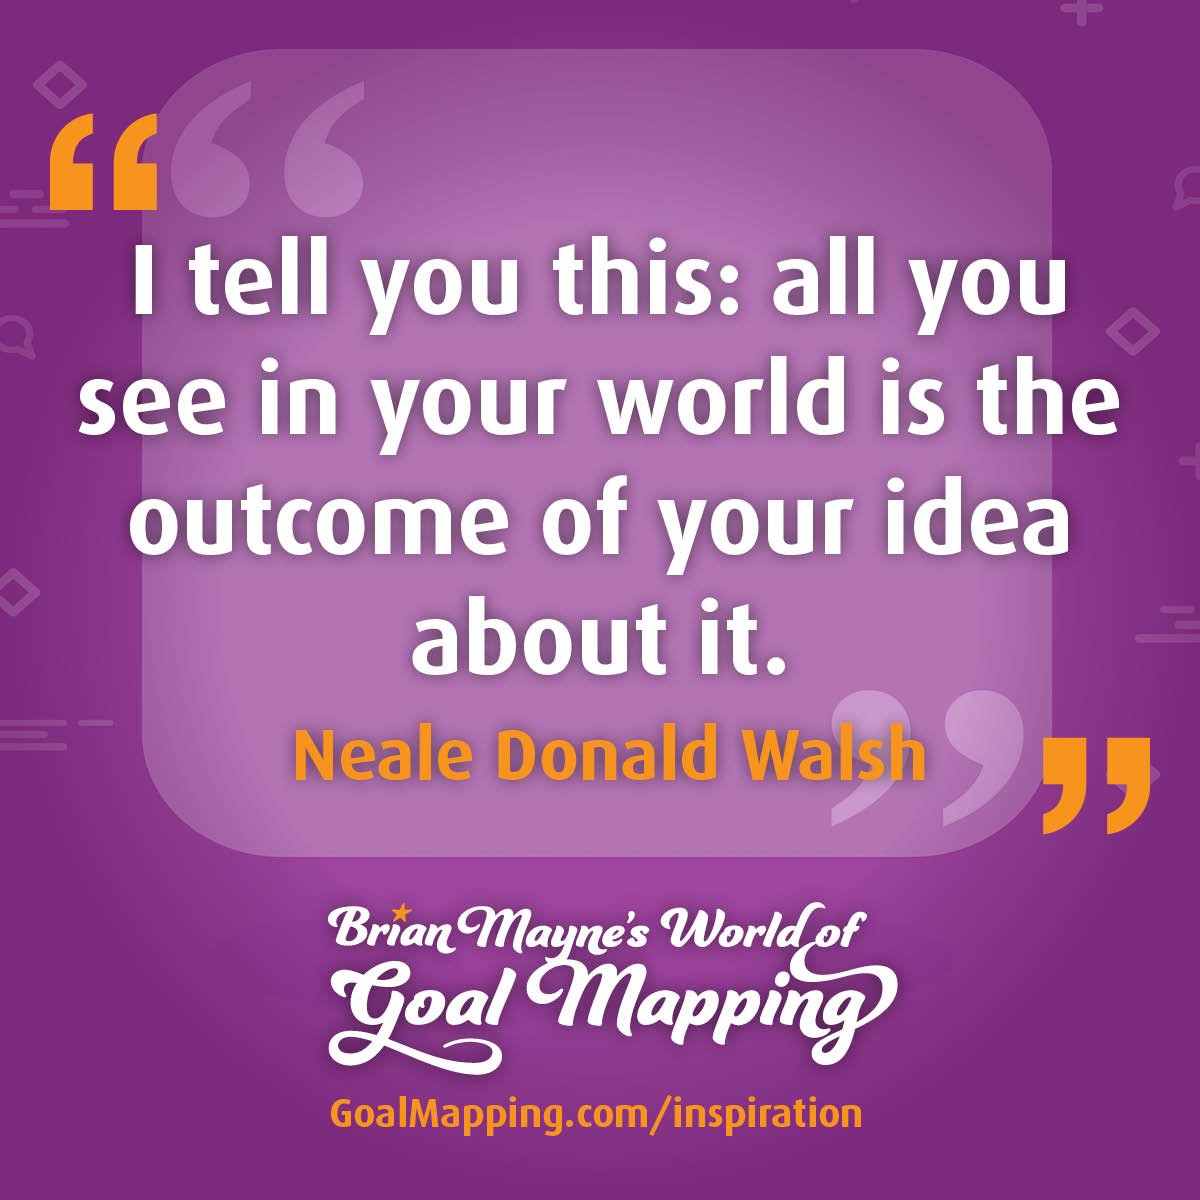 "I tell you this: all you see in your world is the outcome of your idea about it." Neale Donald Walsh